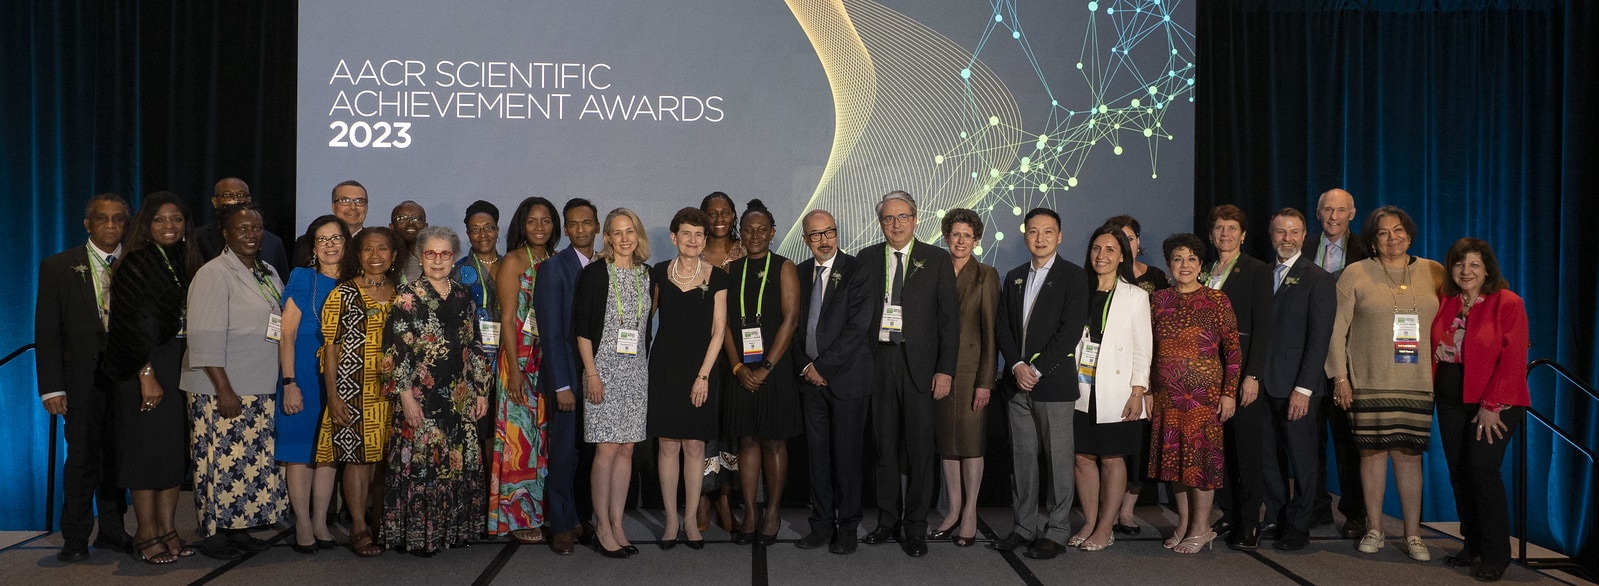 The 2023 recipients of the AACR Scientific Achievement Awards and Lectureship